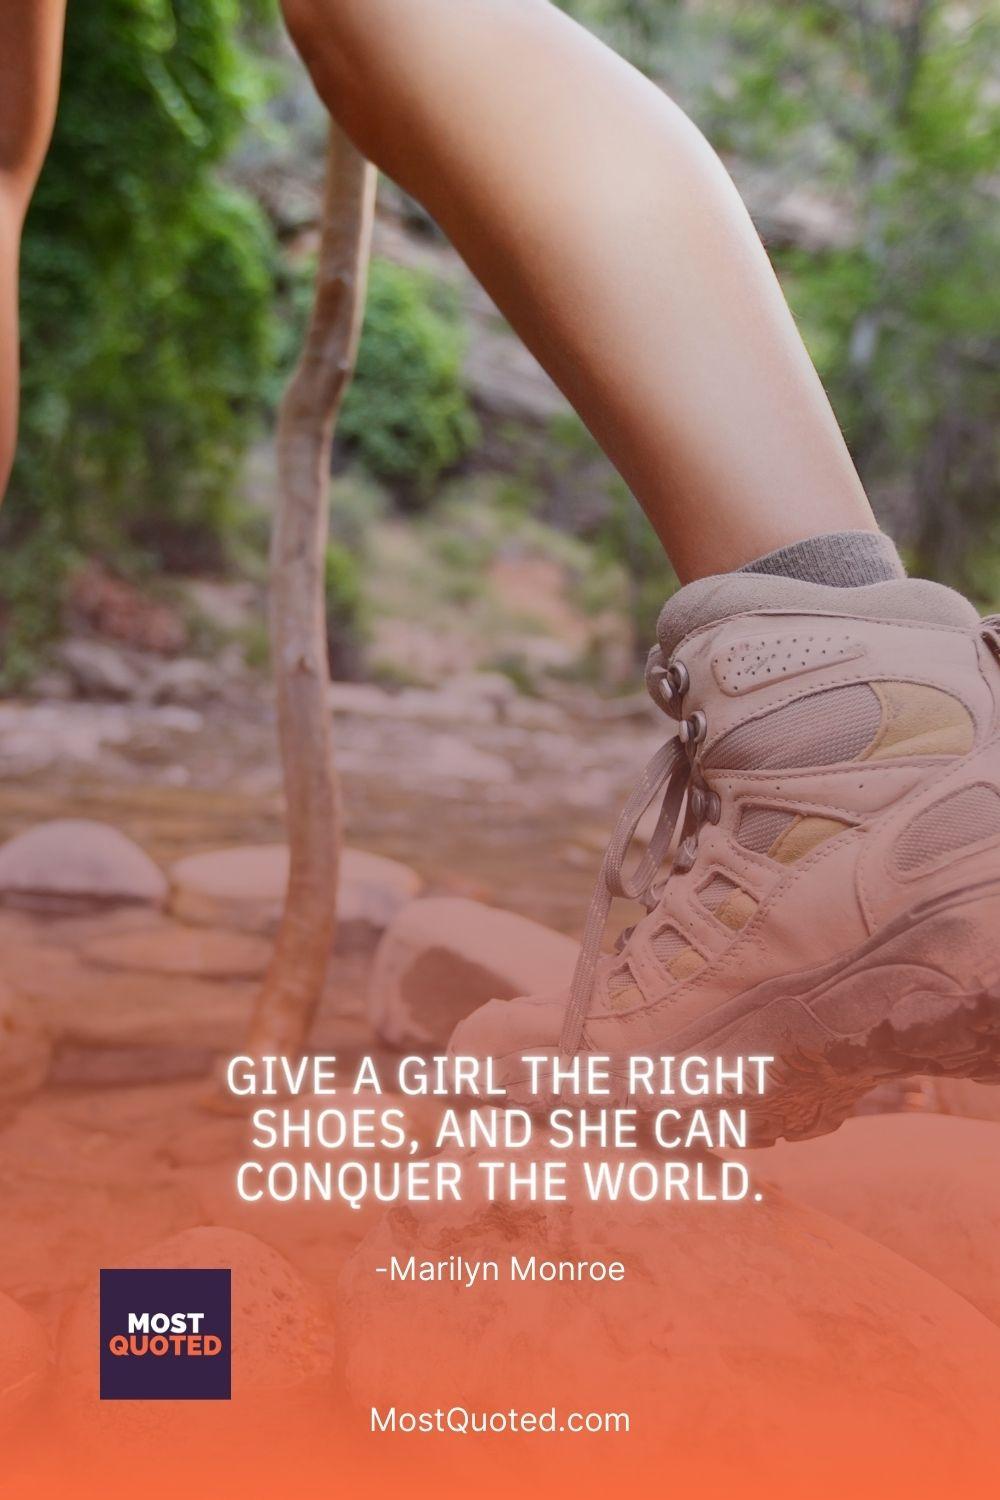 Give a girl the right shoes, and she can conquer the world. - Marilyn Monroe